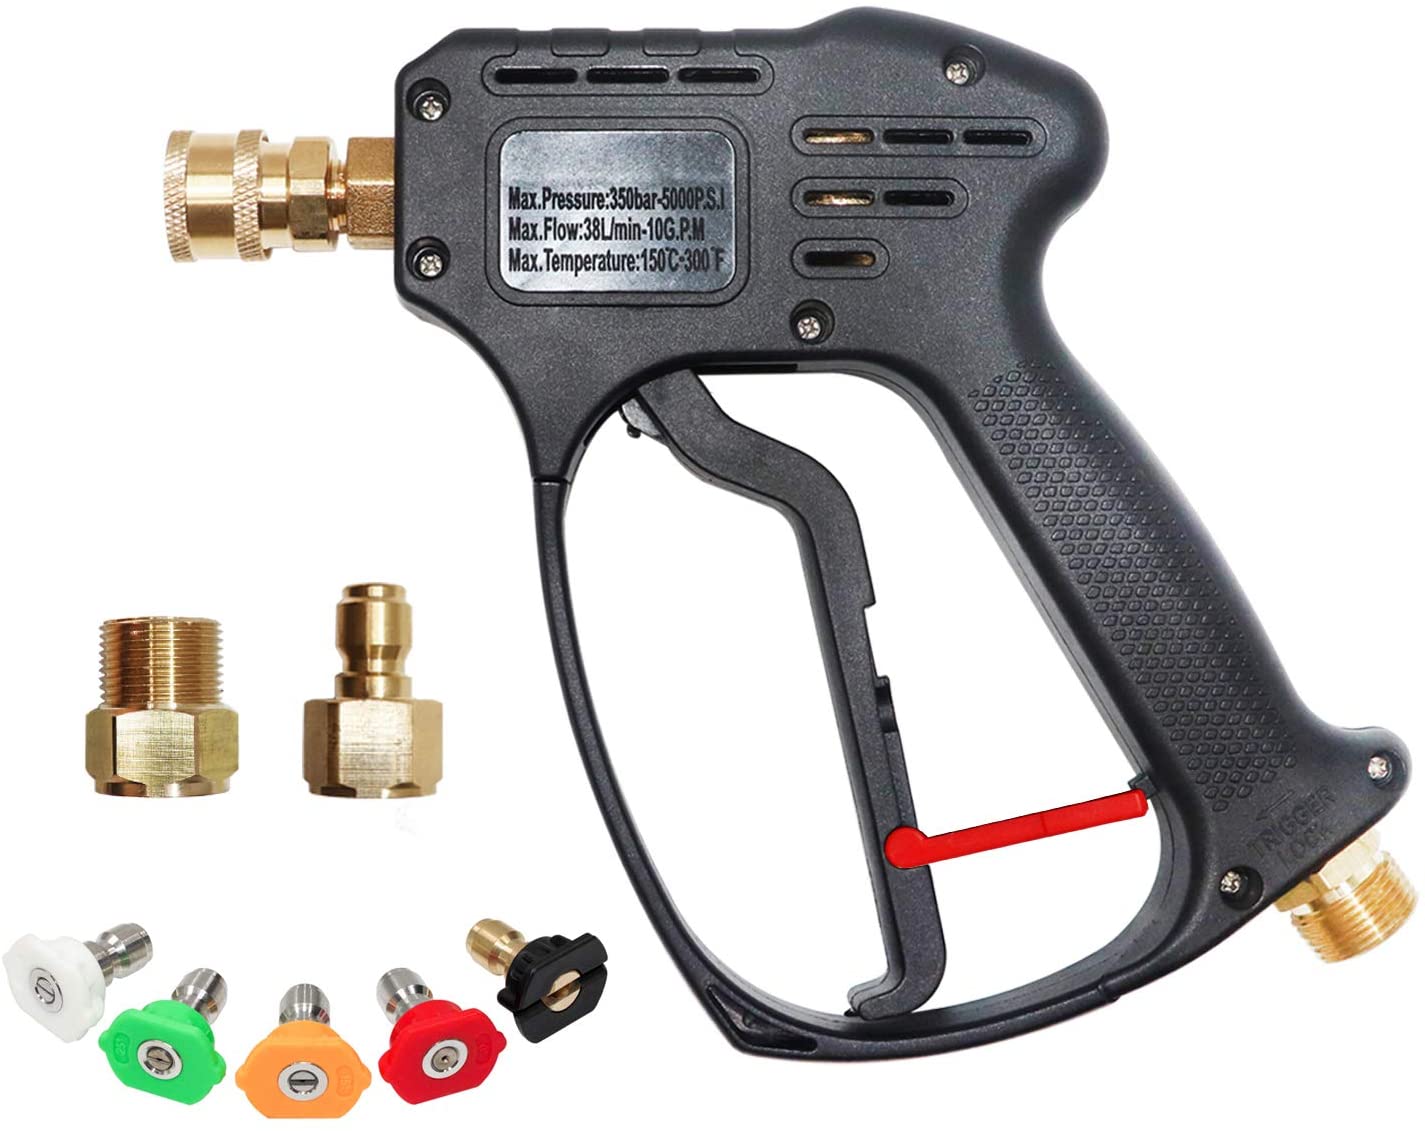 The proper nozzle for your power washer gun: What are their differences?